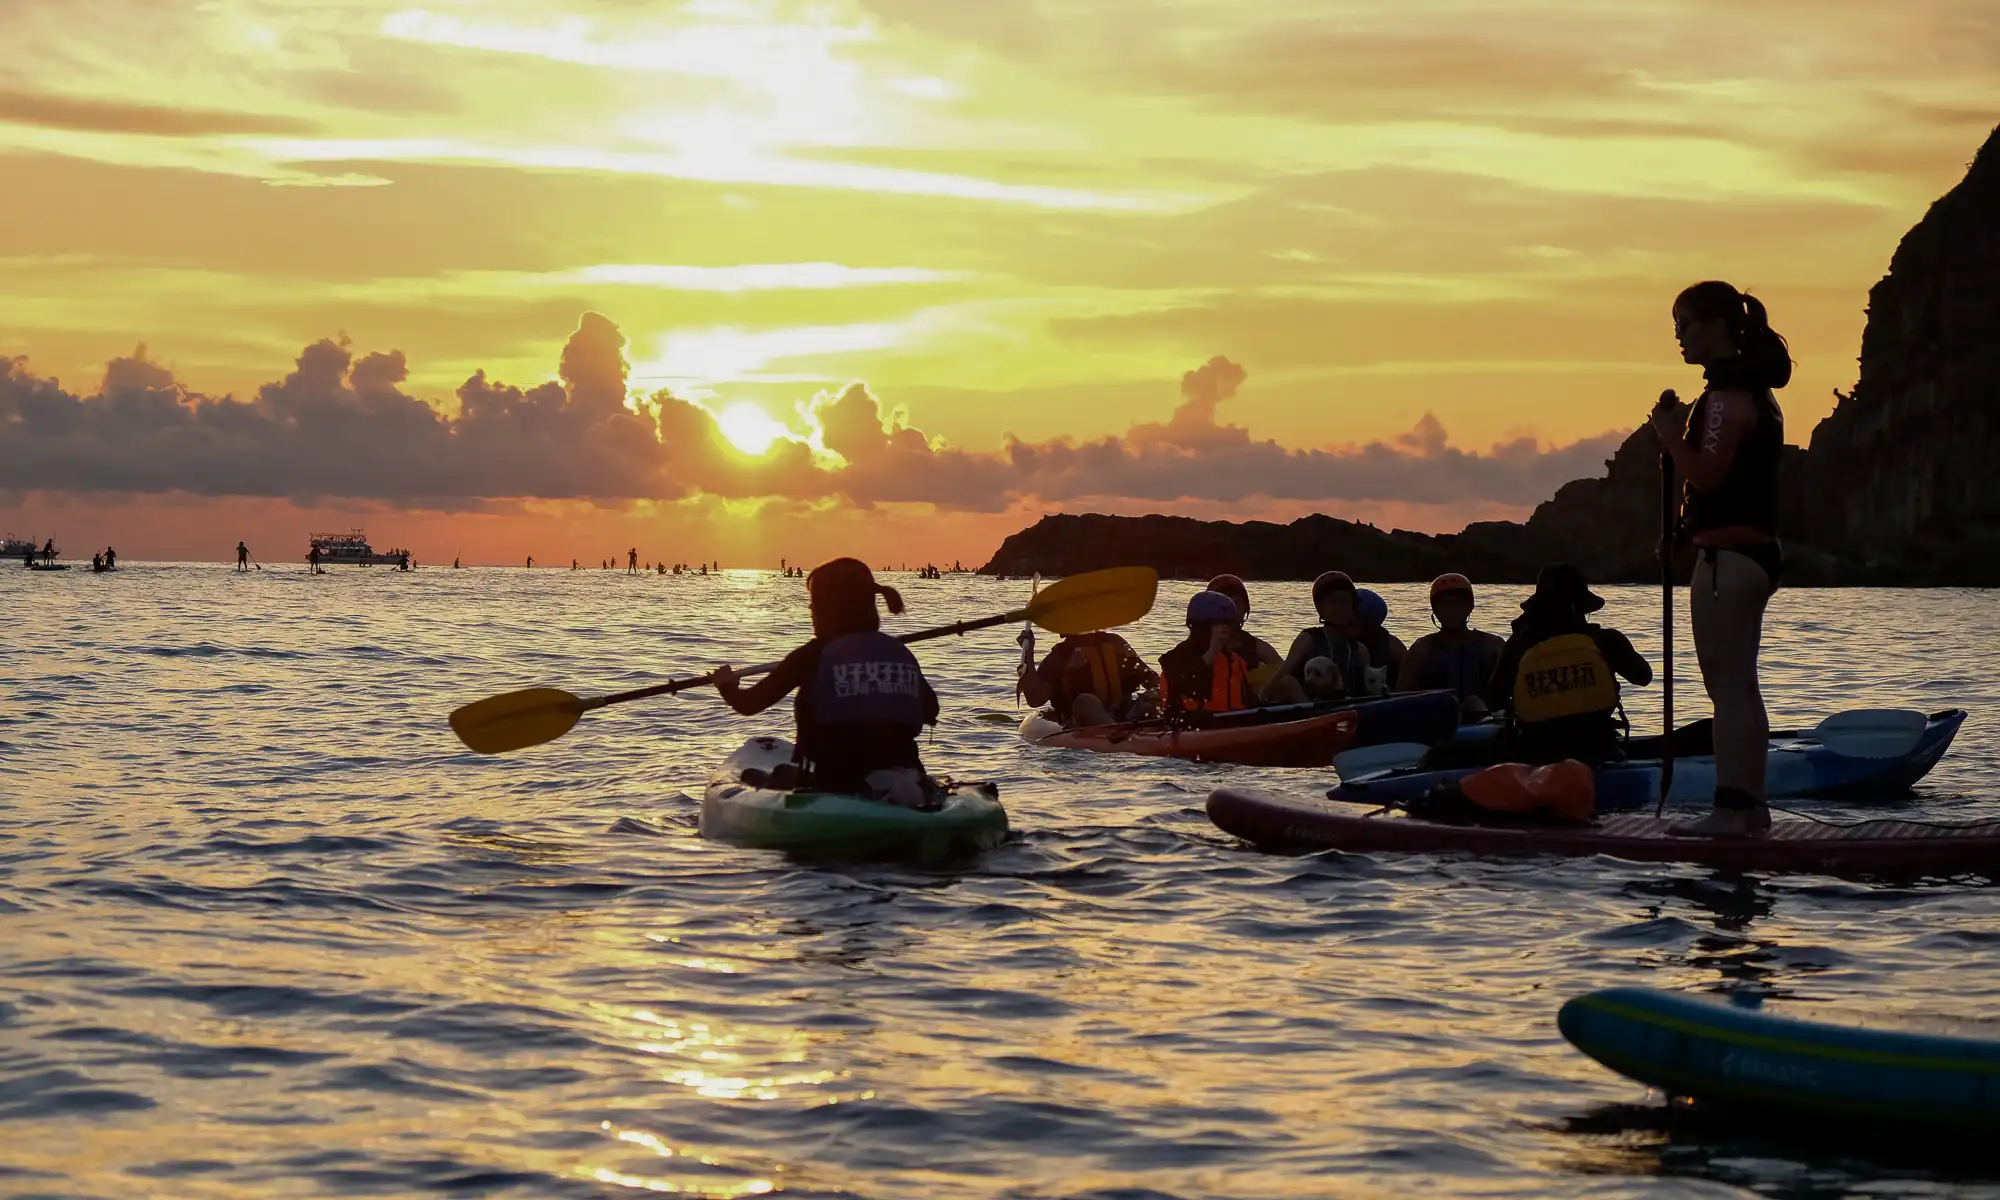 A group of kayakers and paddlers view the sunrise from the ocean.